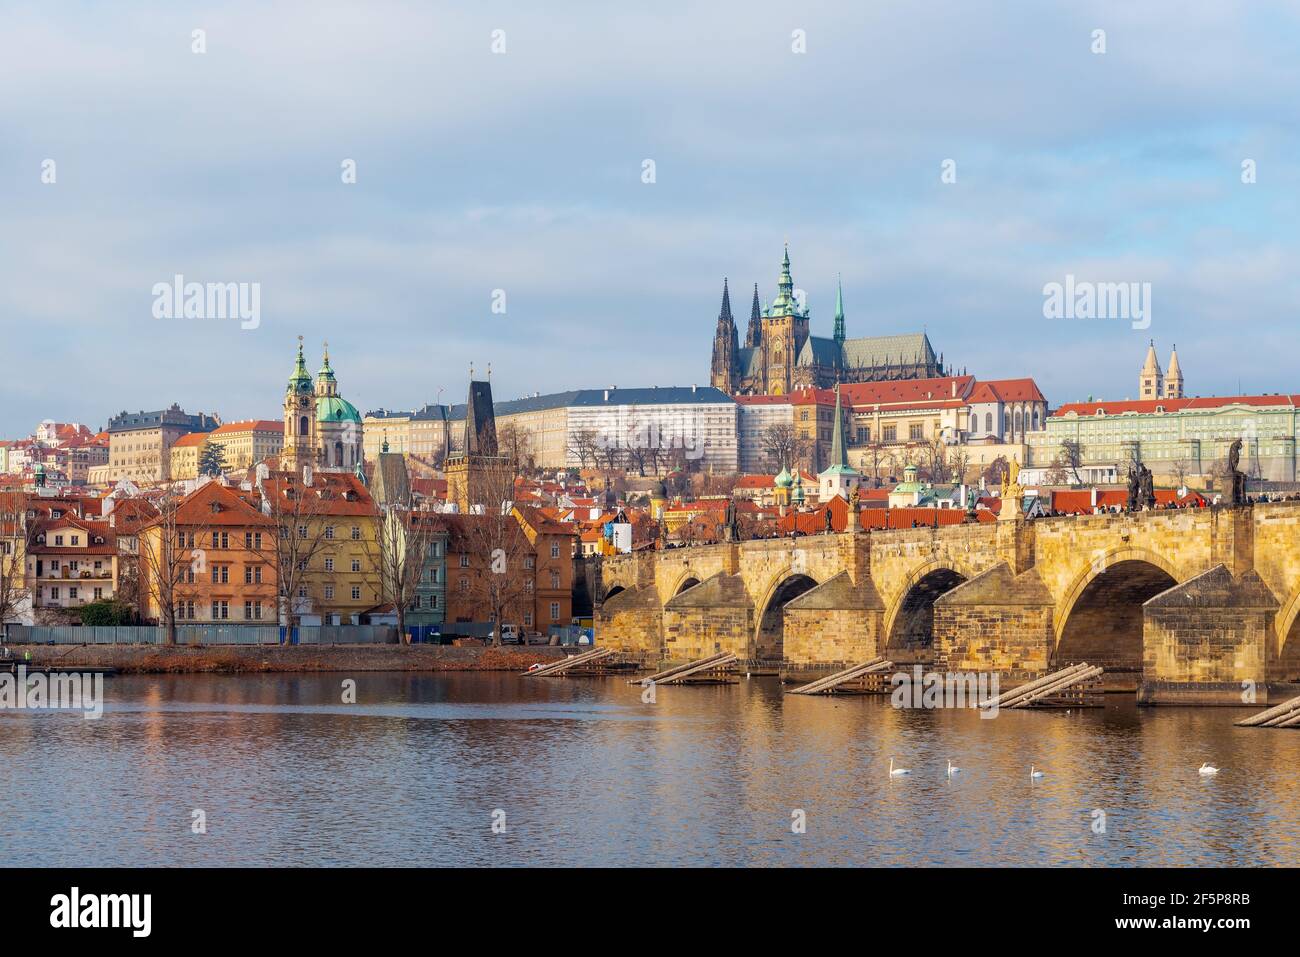 Cityscape of Prague at sunrise with view over Mala Strana district with Charles Bridge, Cathedral and Hradcany Castle, Czech Republic. Stock Photo